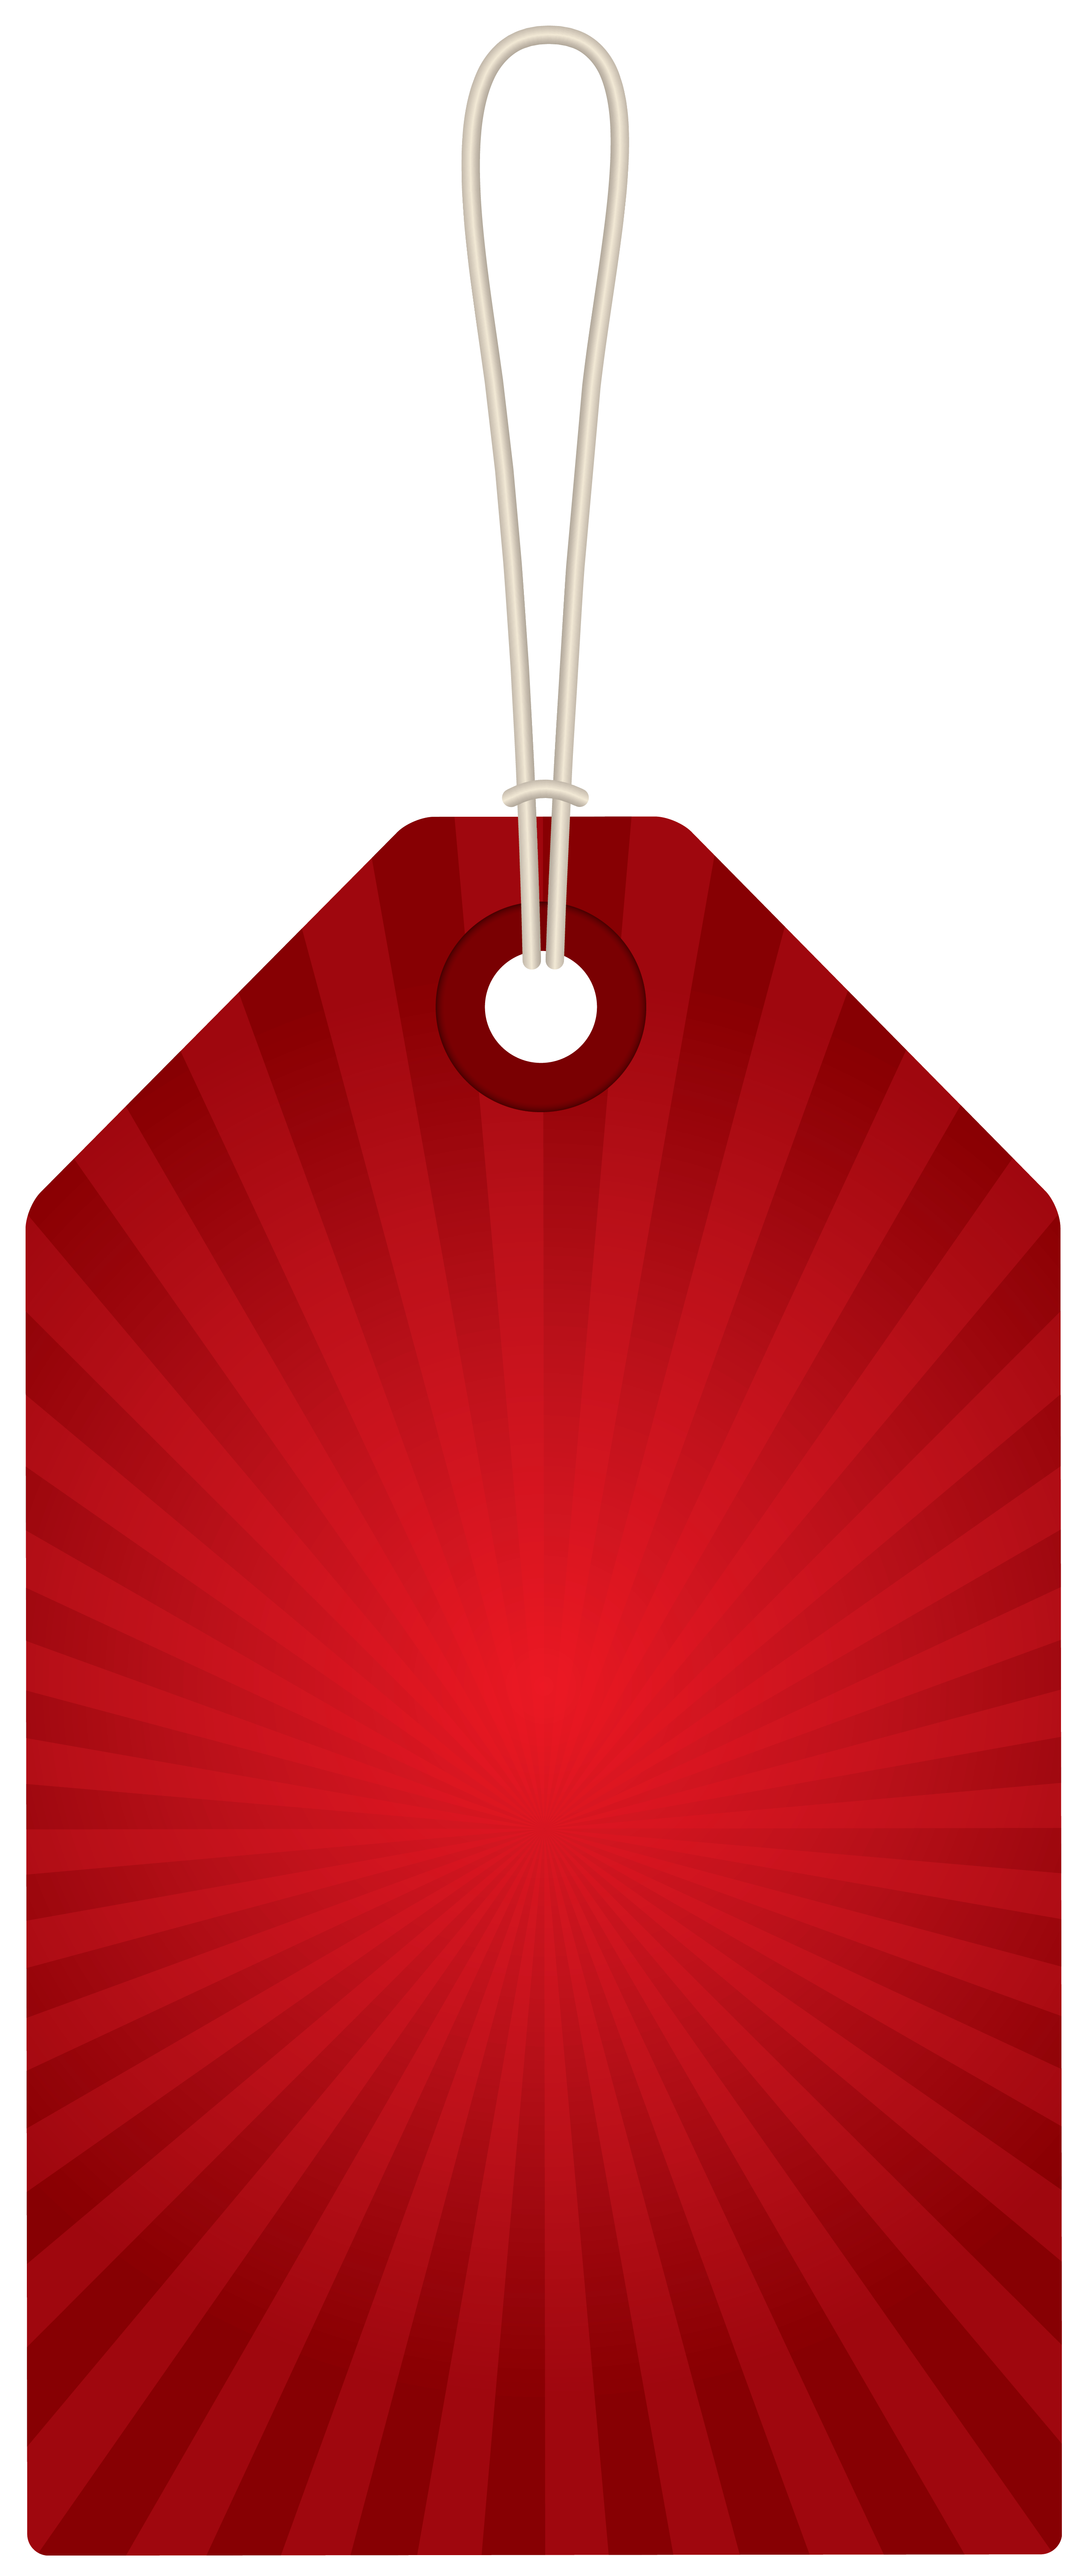 Png picture gallery yopriceville. Label clipart red